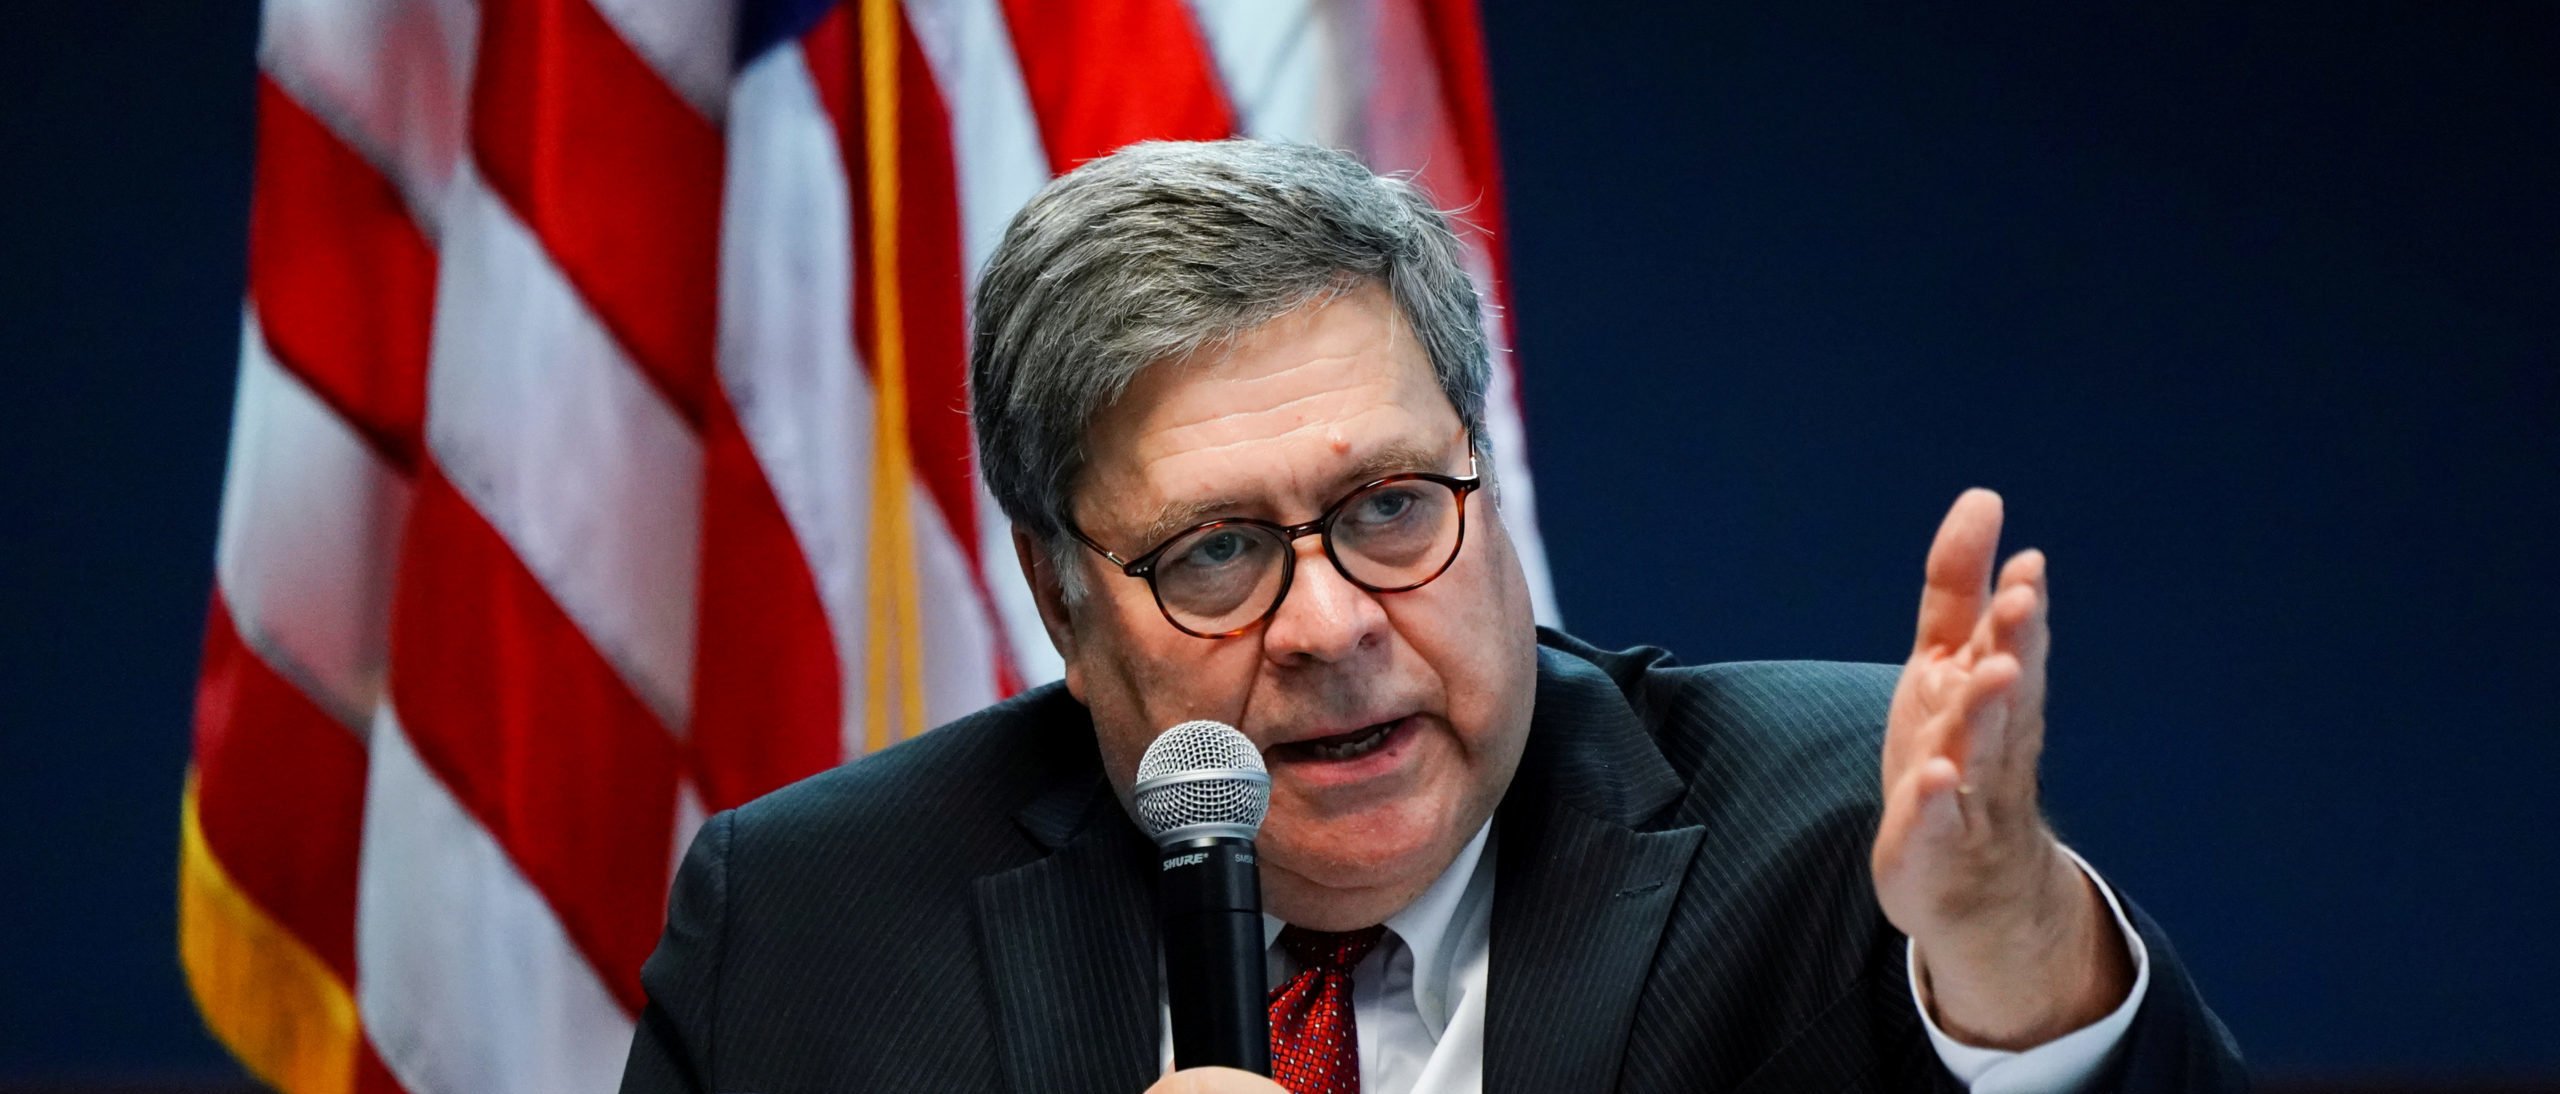 FILE PHOTO: U.S. Attorney General William Barr participates in a roundtable discussion about human trafficking at the U.S. Attorney's Office in Atlanta, Georgia, U.S., September 21, 2020. REUTERS/Elijah Nouvelage/File Photo